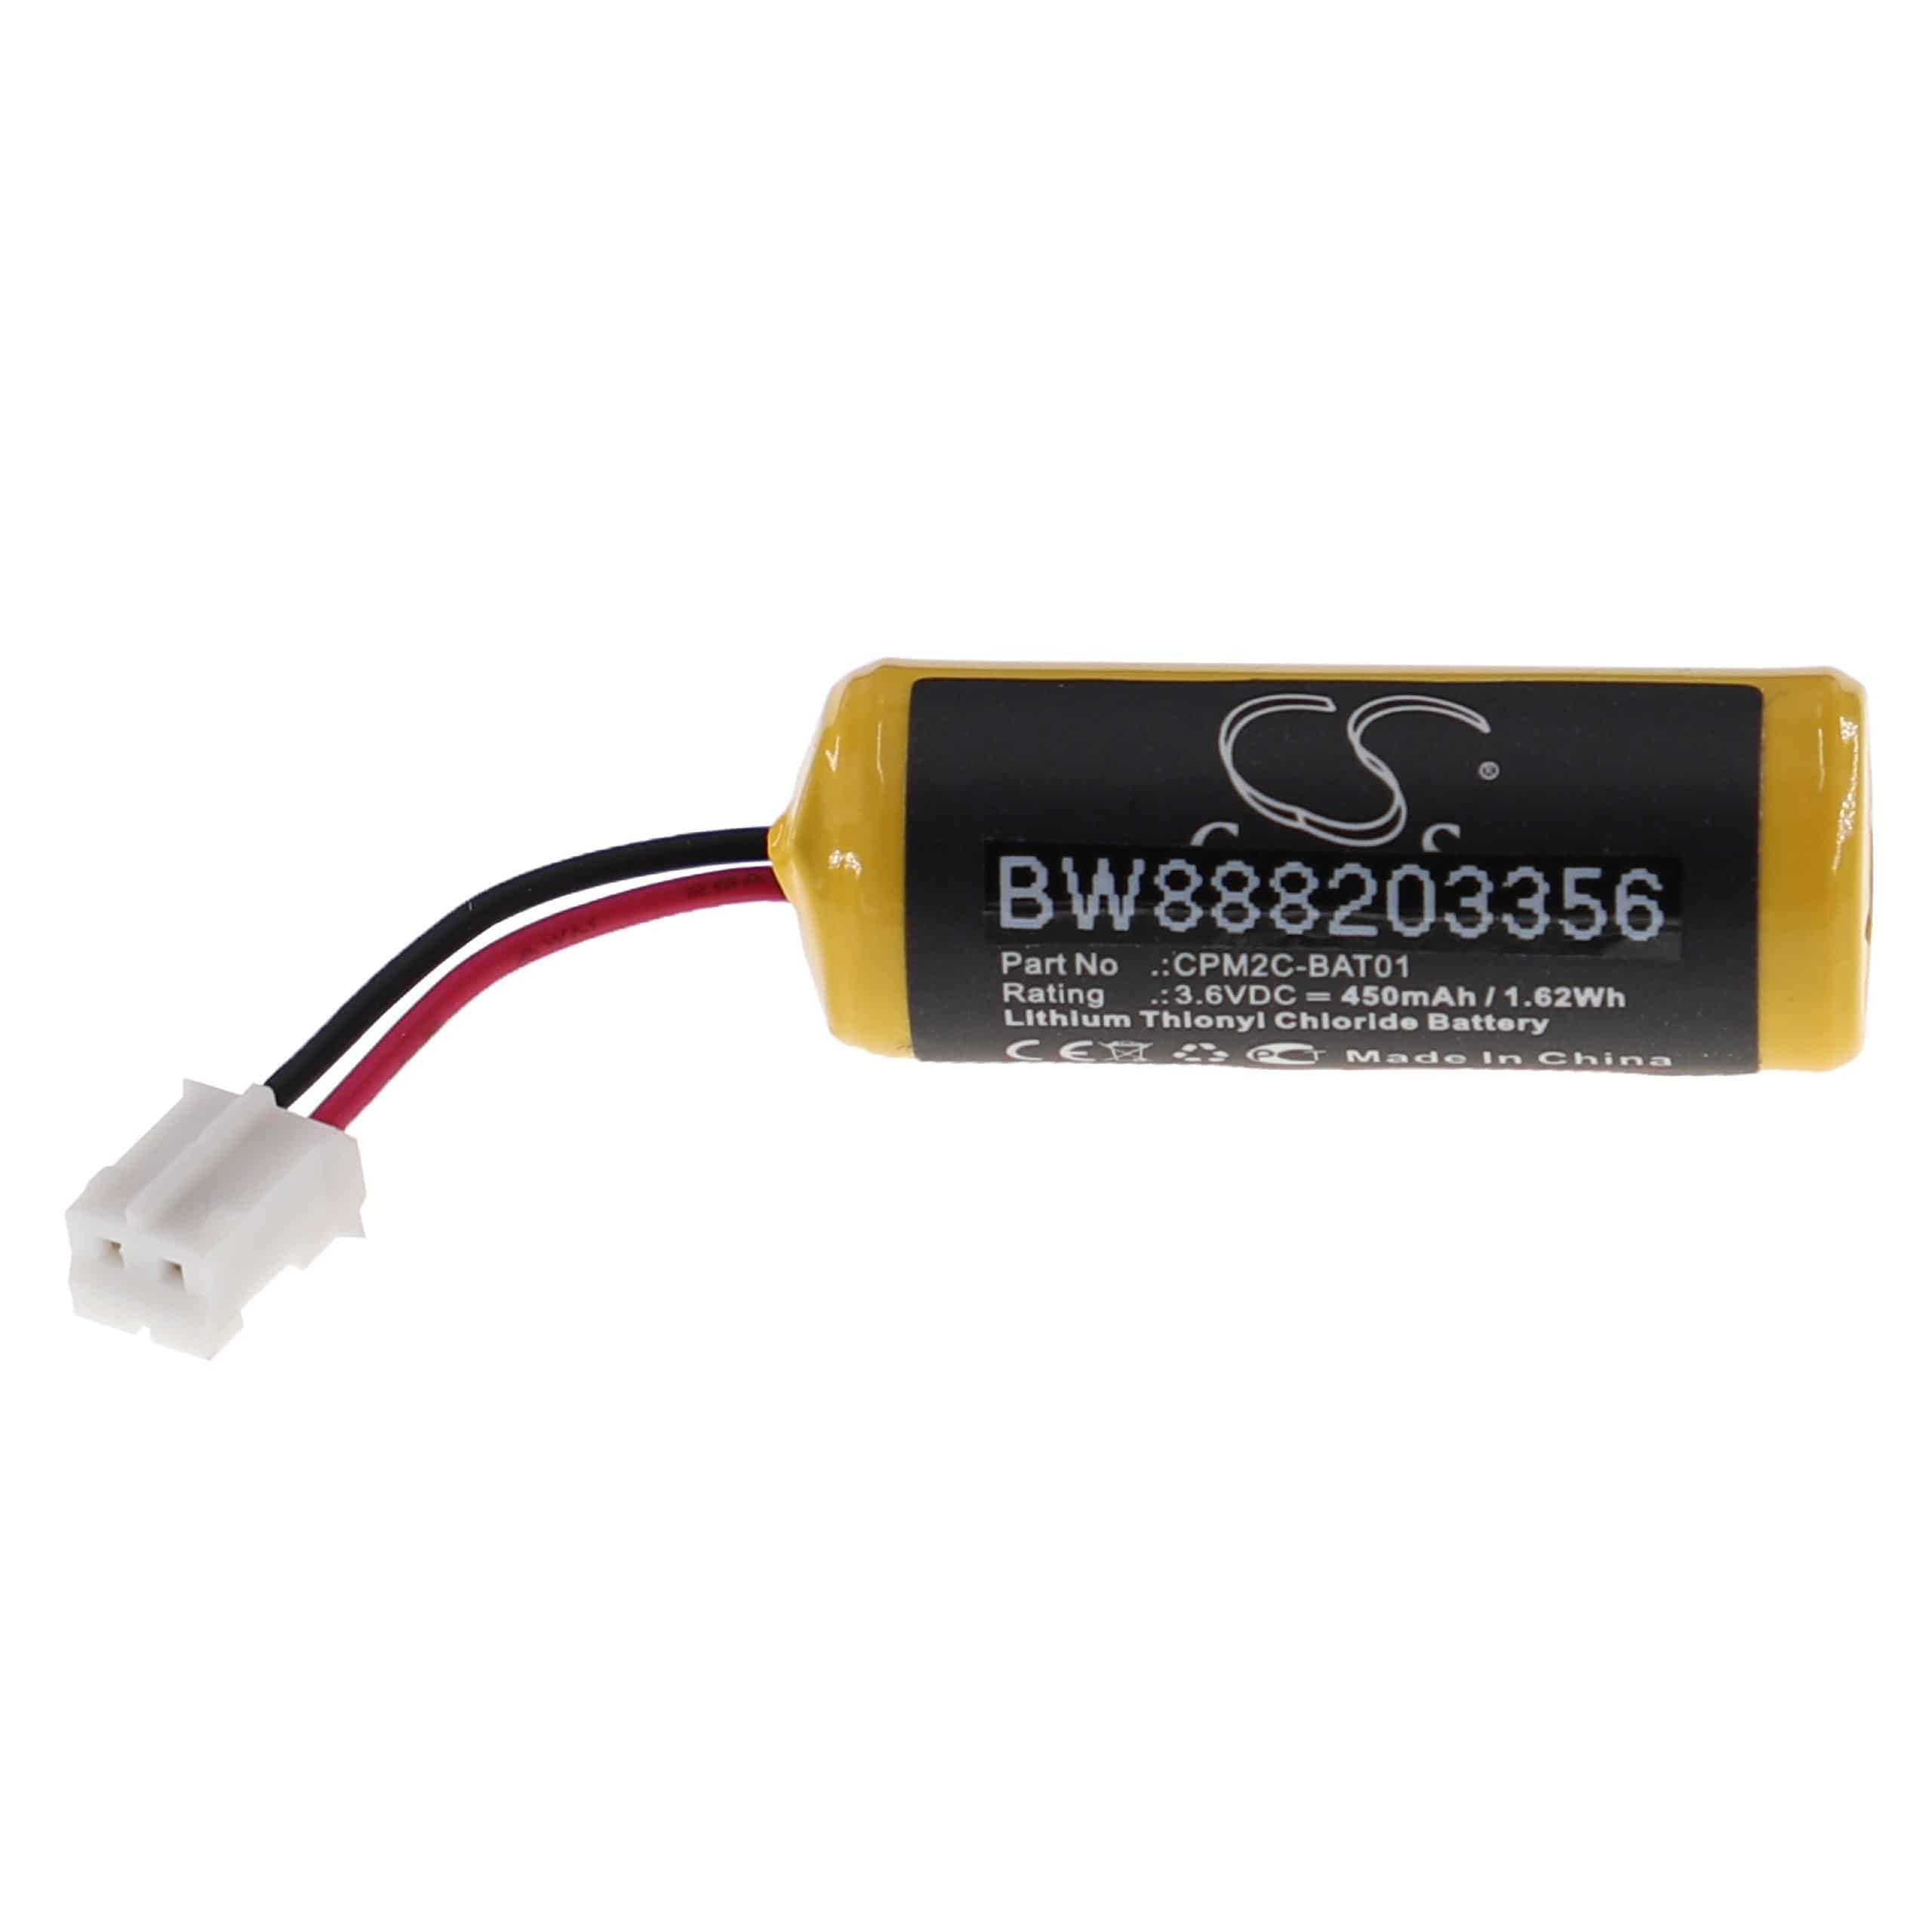 Industrial Controller Battery Replacement for Omron CPM2C-BAT01 - 450mAh 3.6V Li-SOCl2